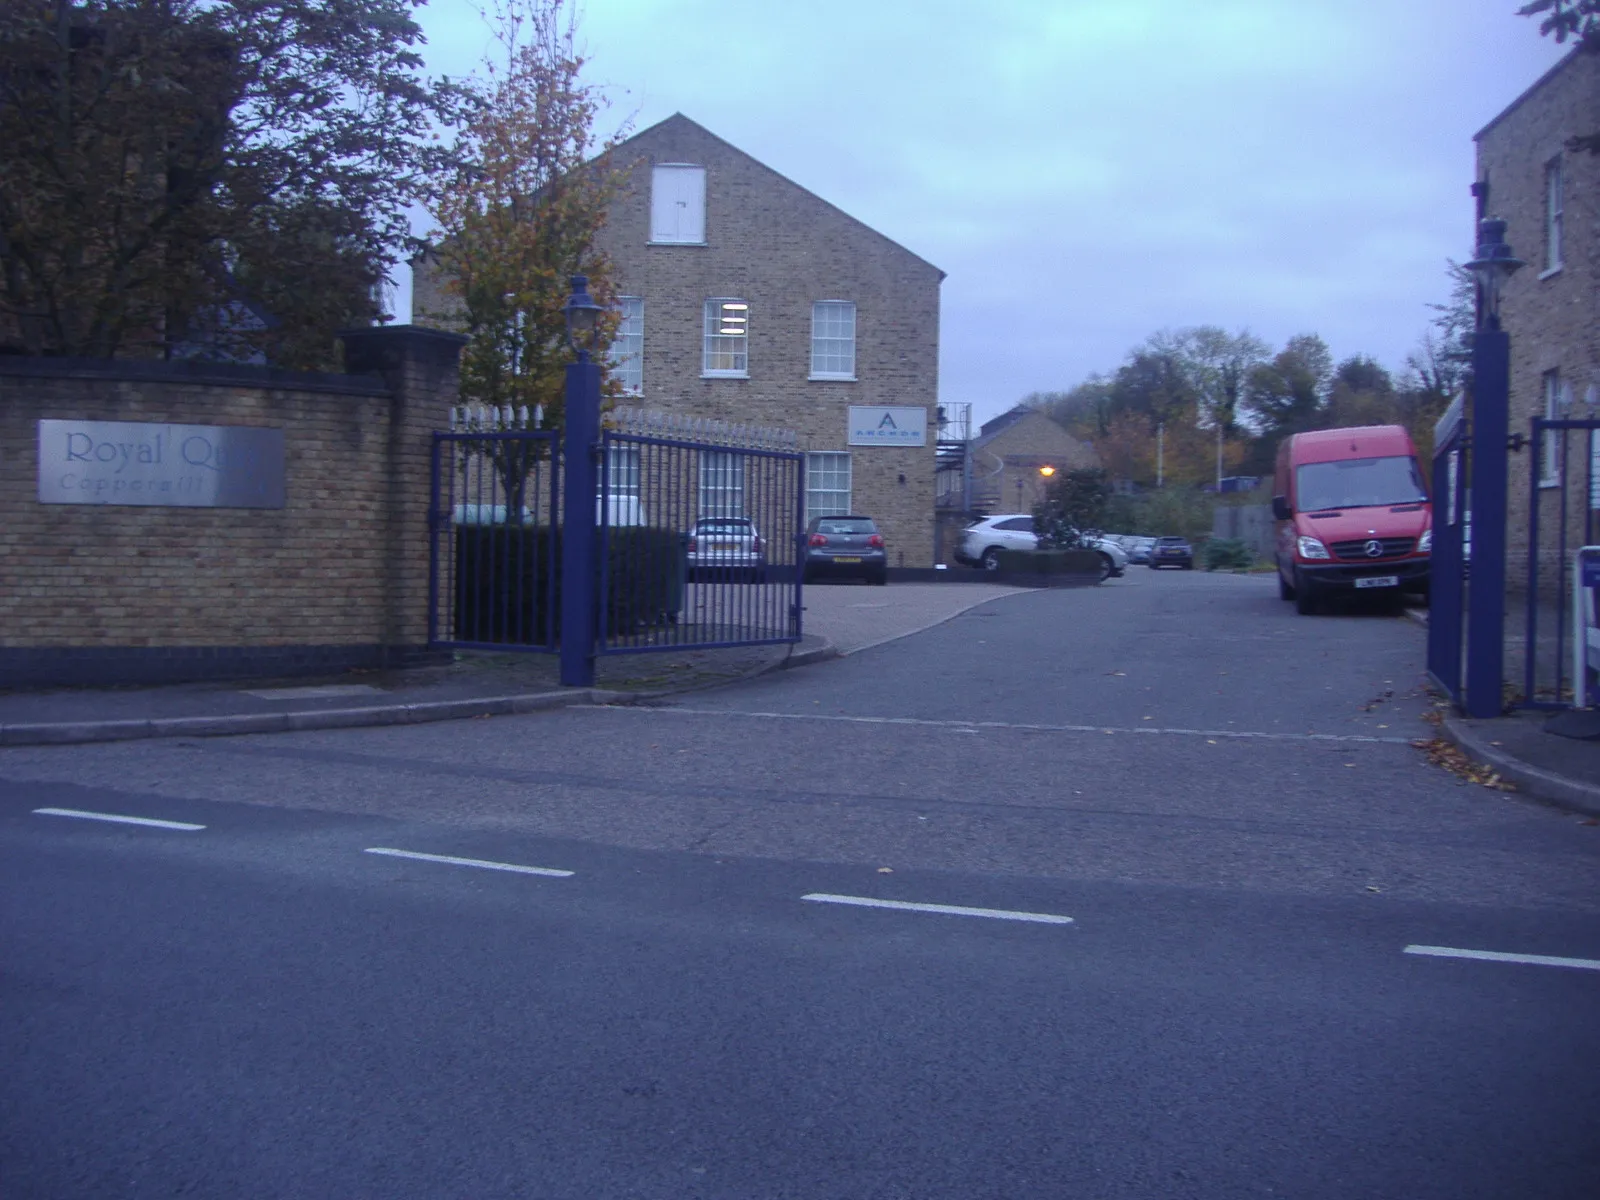 Photo showing: Entrance to Royal Quay, Park Lane, Harefield